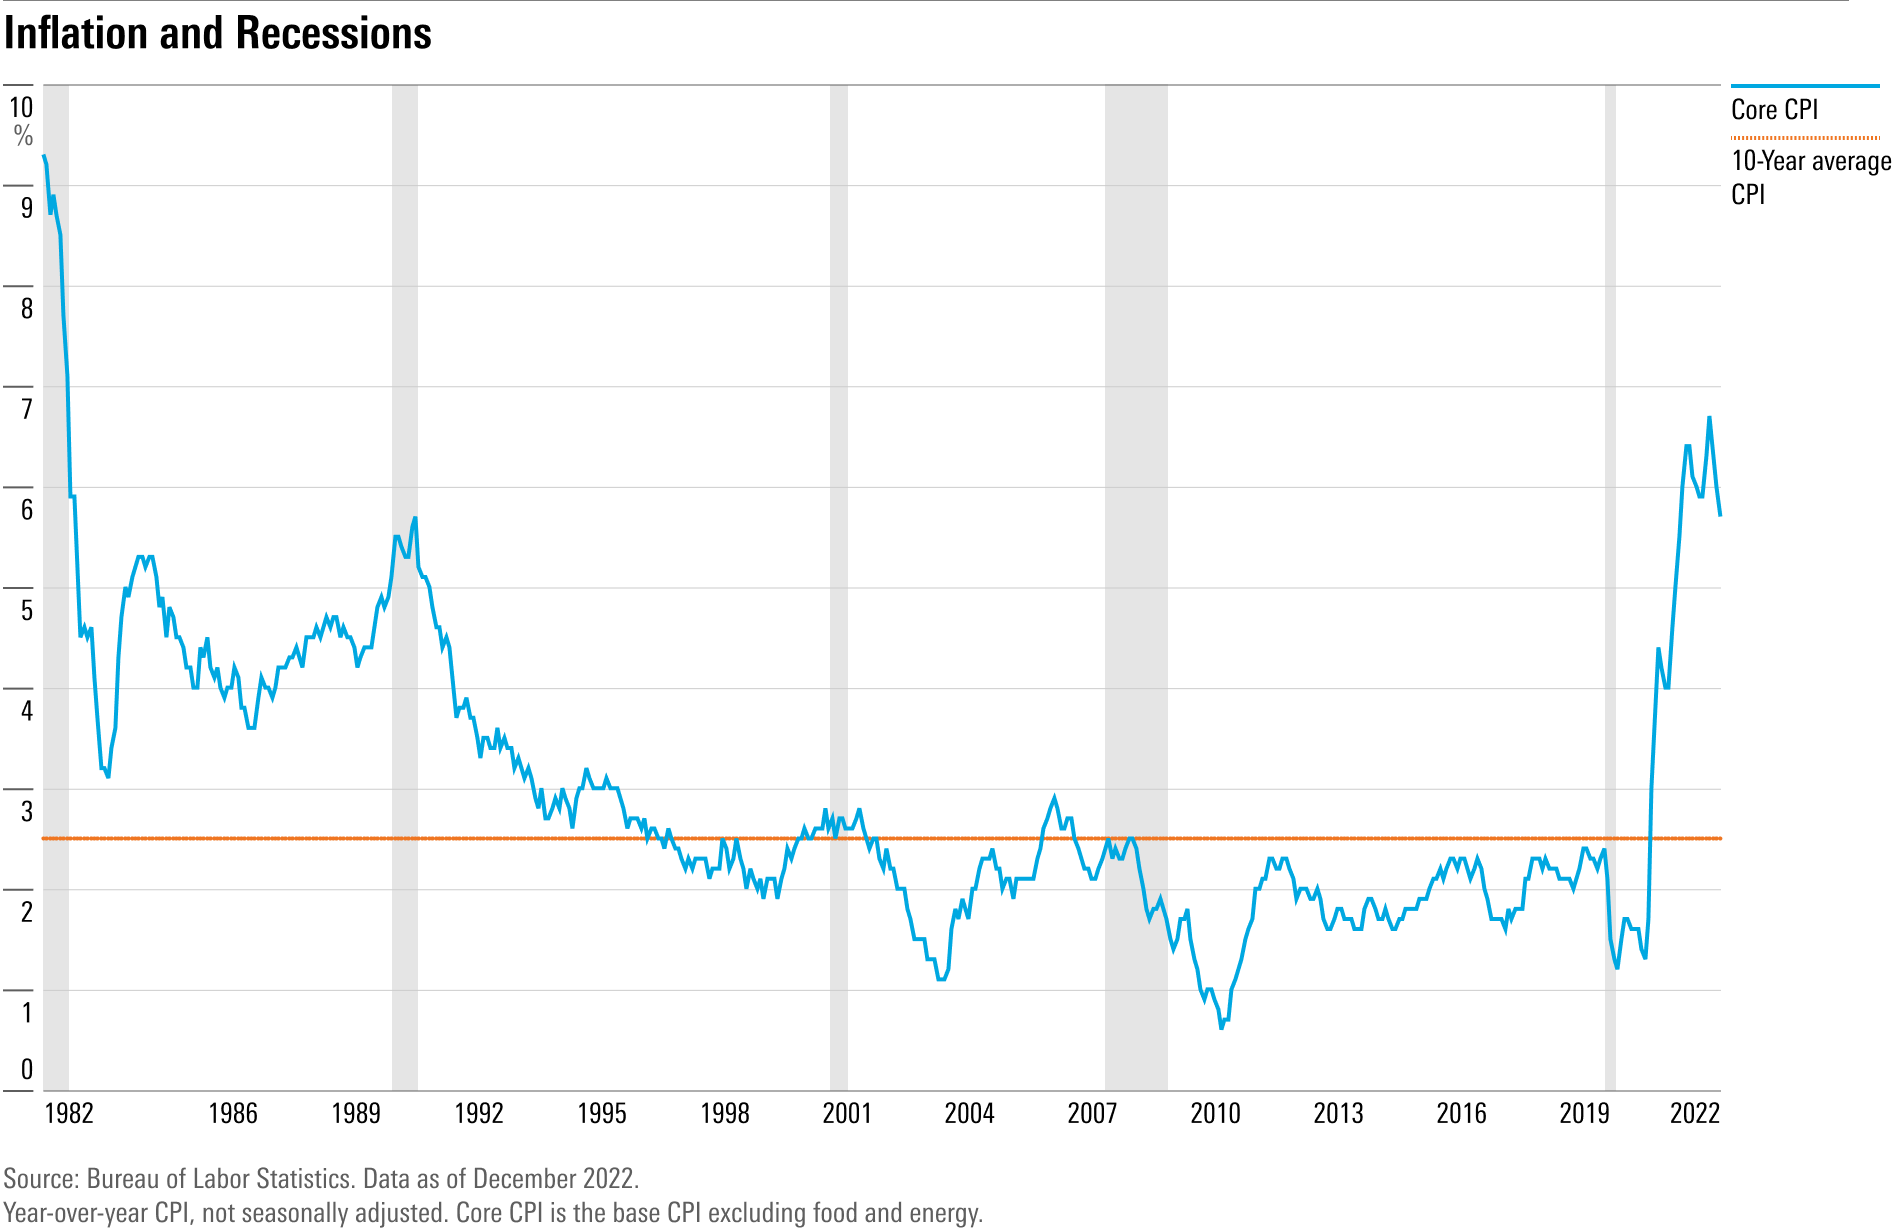 Core inflation plotted against recession history.